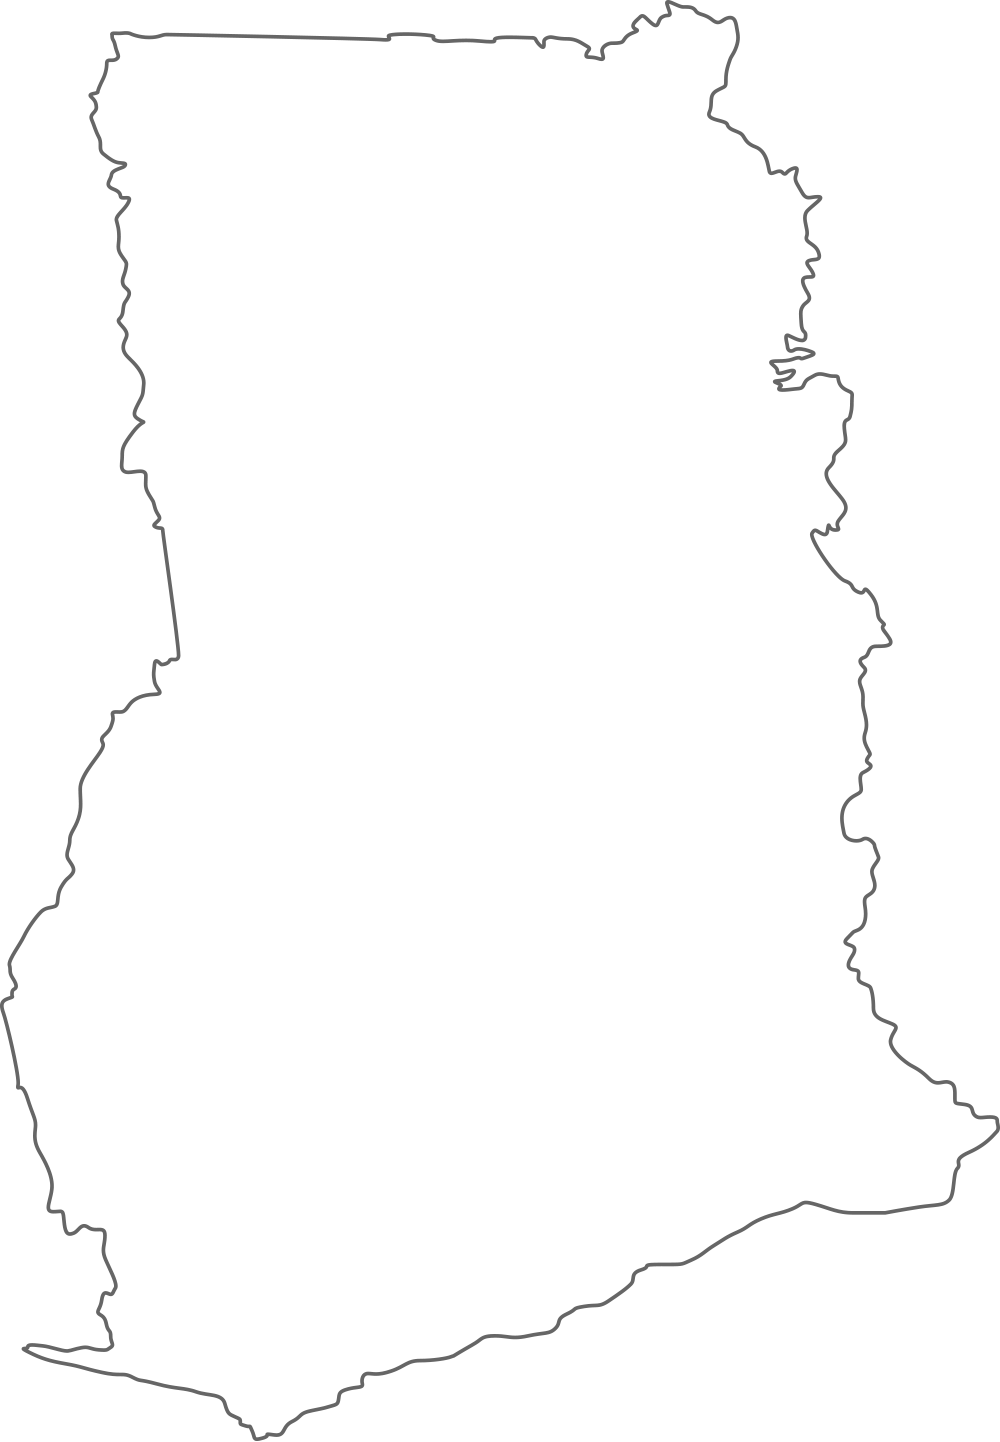 Ghana Map with cities - blank outline map of Ghana-